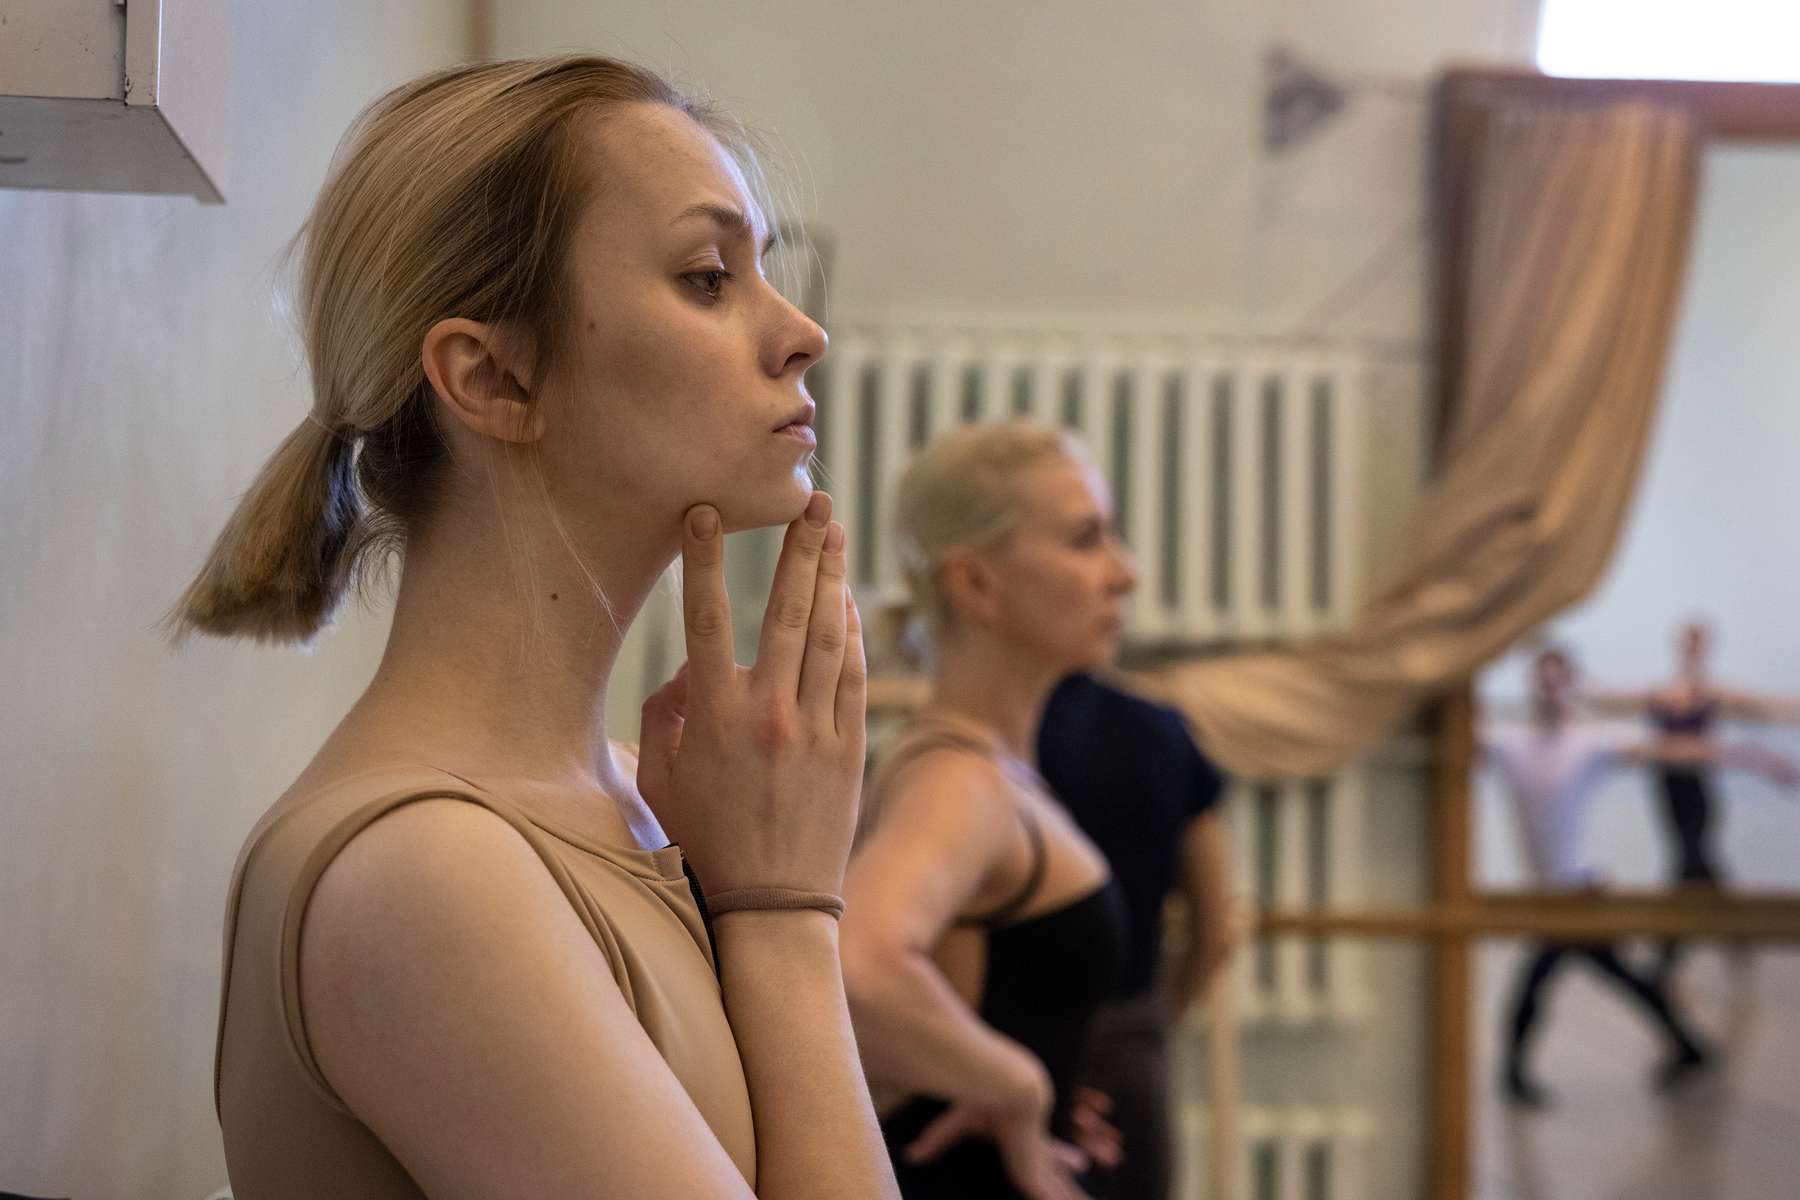 LVIV, UKRAINE -  Dancers are seen during Lviv ballet practice on May 18, 2022 in Lviv, Ukraine. The Lviv National Opera house started performances last month for both ballet and opera.The bomb shelter can only hold 300 people so tickets are limited incase a siren goes off during the performance. (Photo by Paula Bronstein /Getty Images)